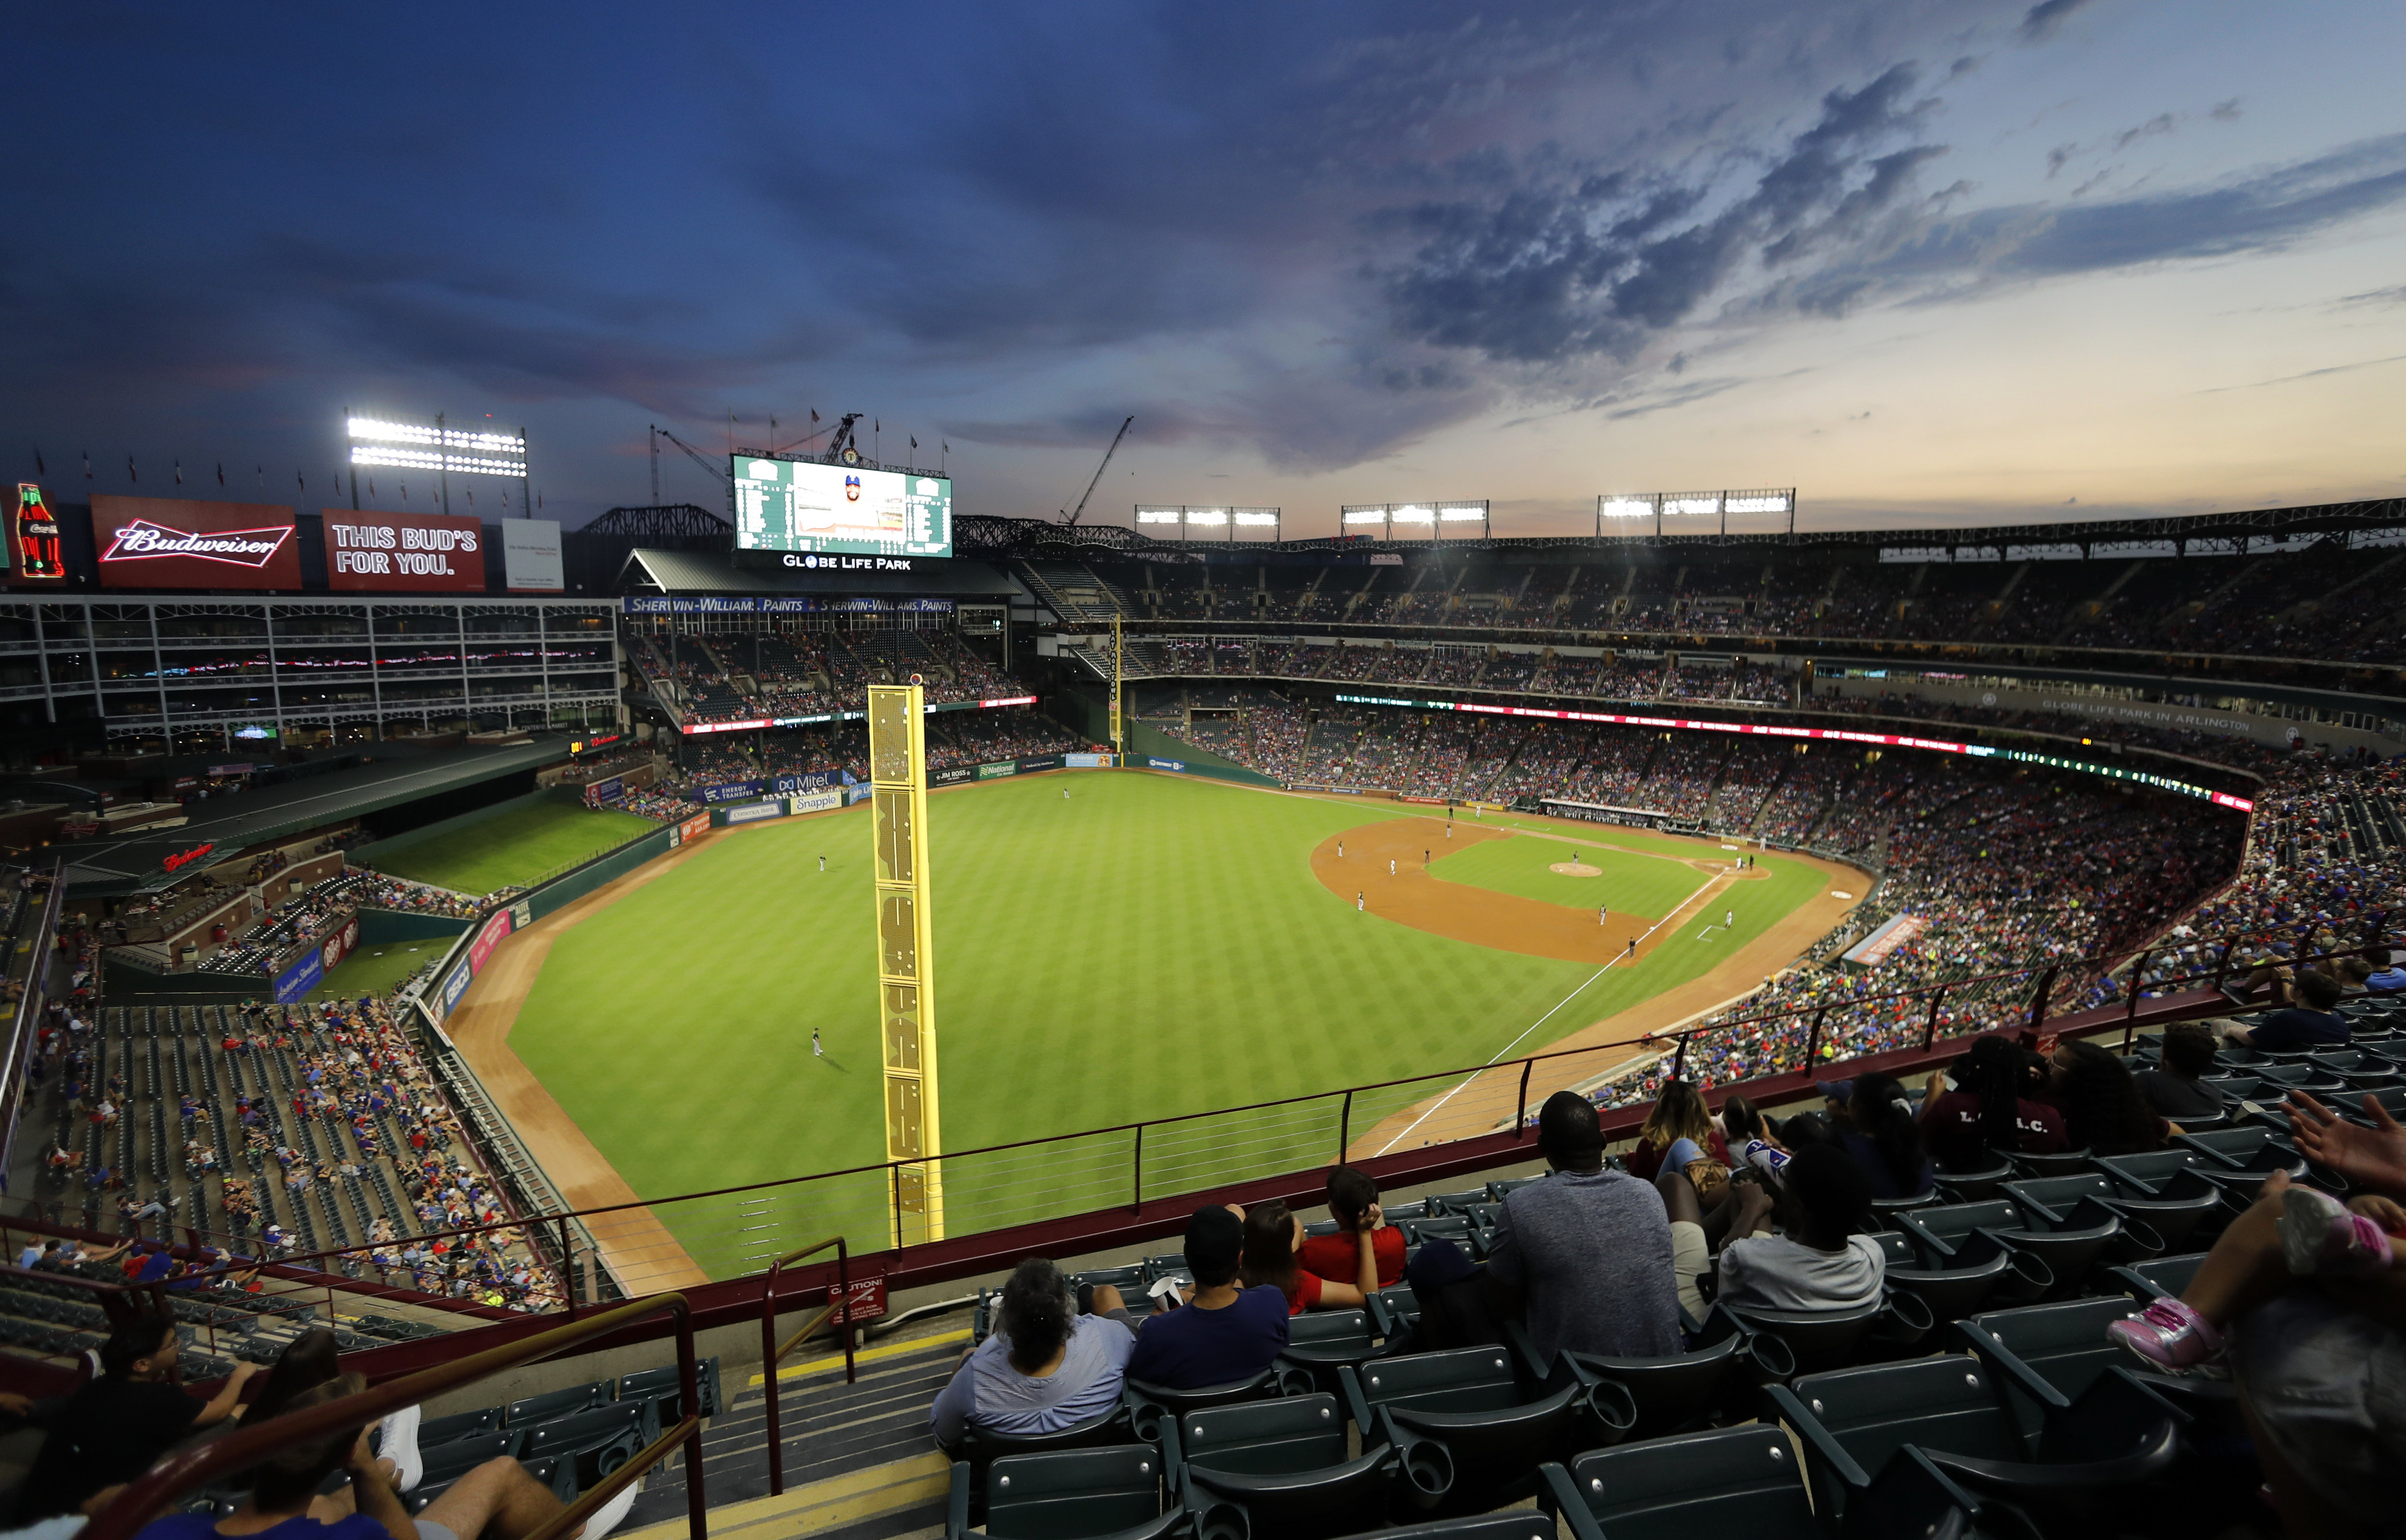 Rangers play final homestand ahead of move to new stadium